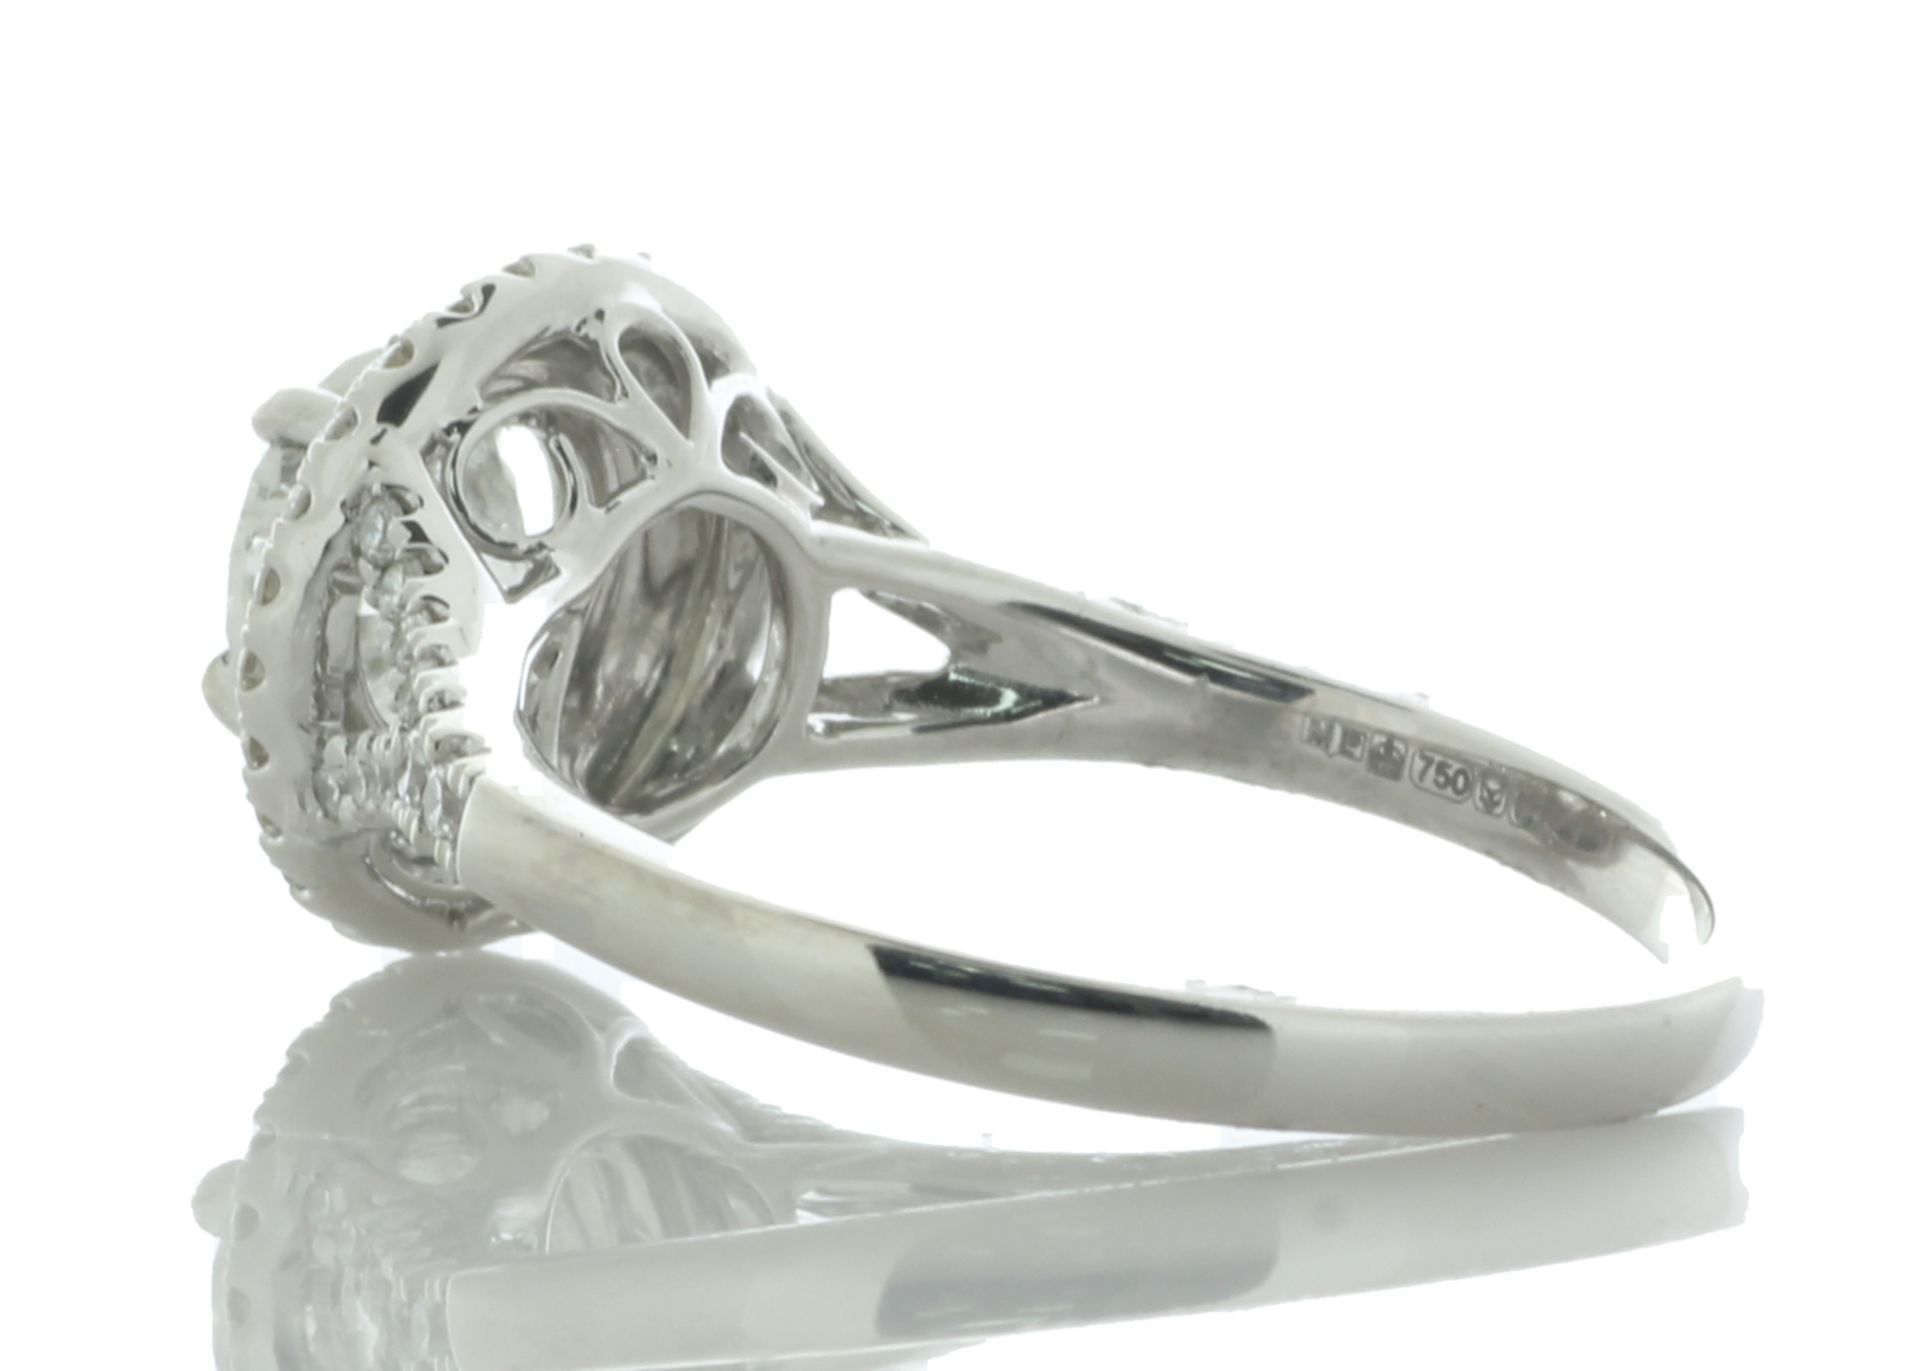 18ct White Gold Single Stone With Halo Setting Ring (0.86) 1.21 Carats - Valued By GIE £16,950. - Image 3 of 5